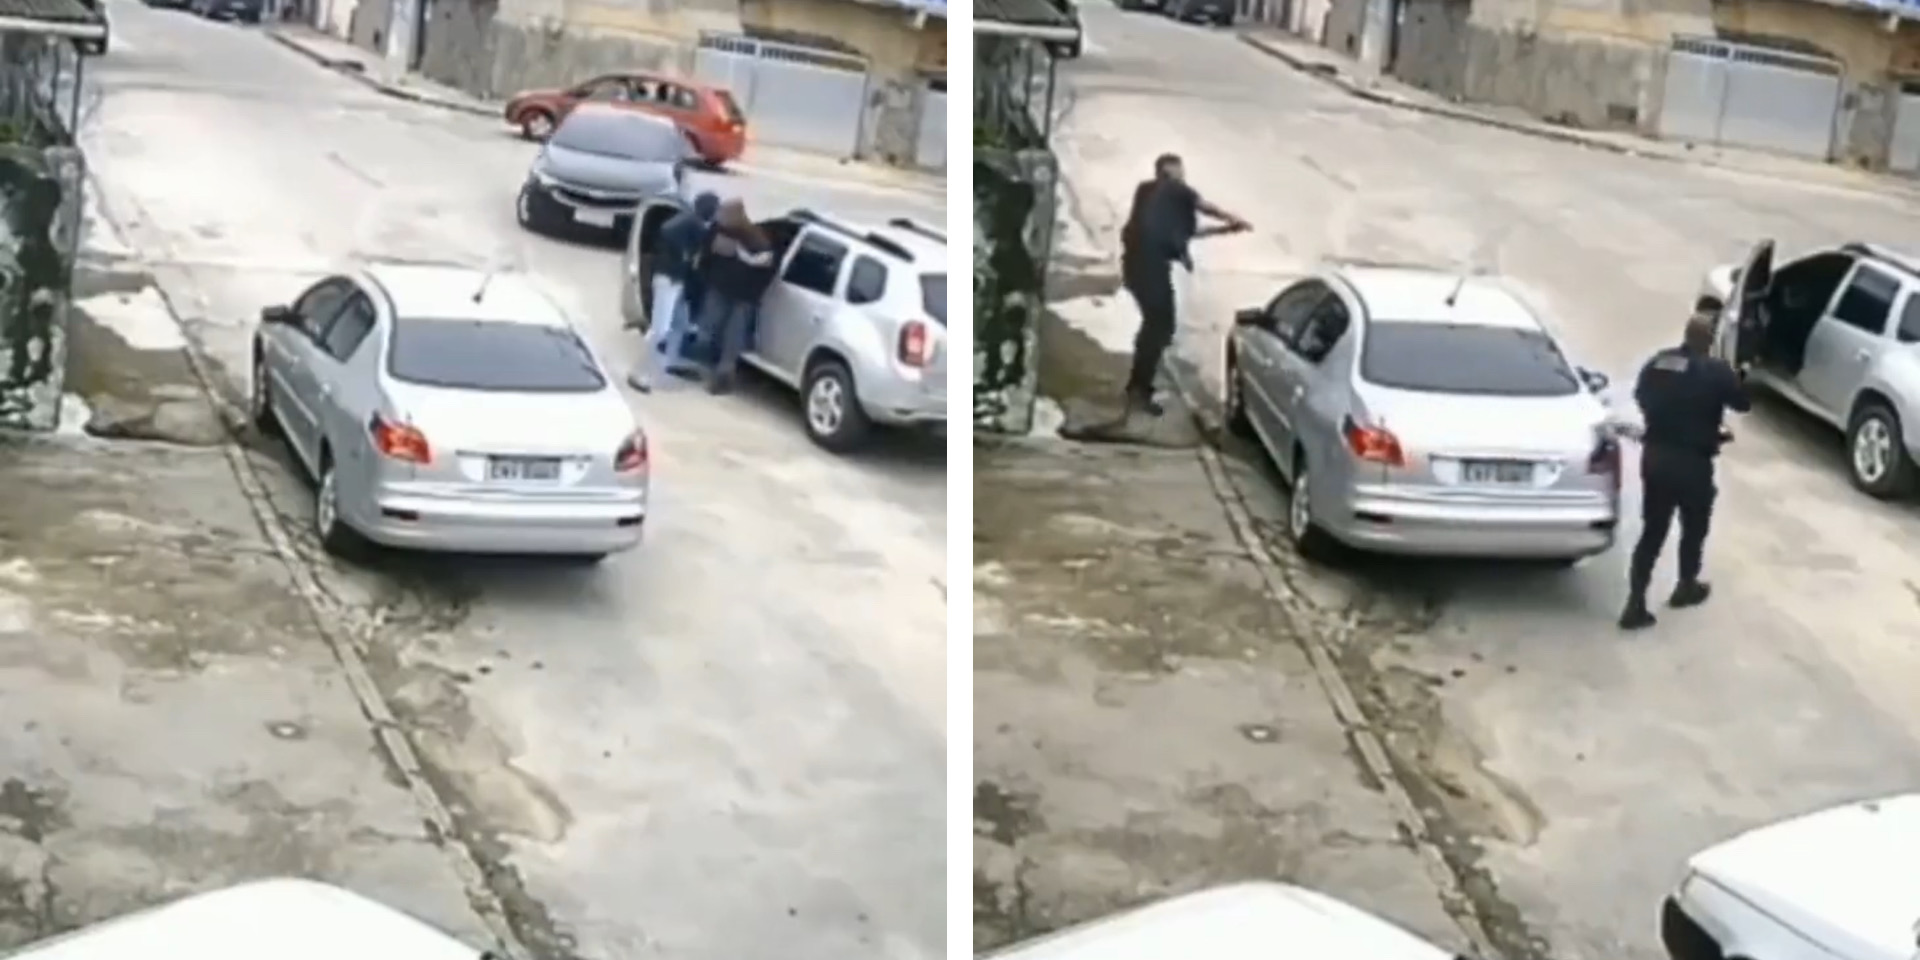 Car thieves arrested after failing to drive away an SUV they snatched [Video]